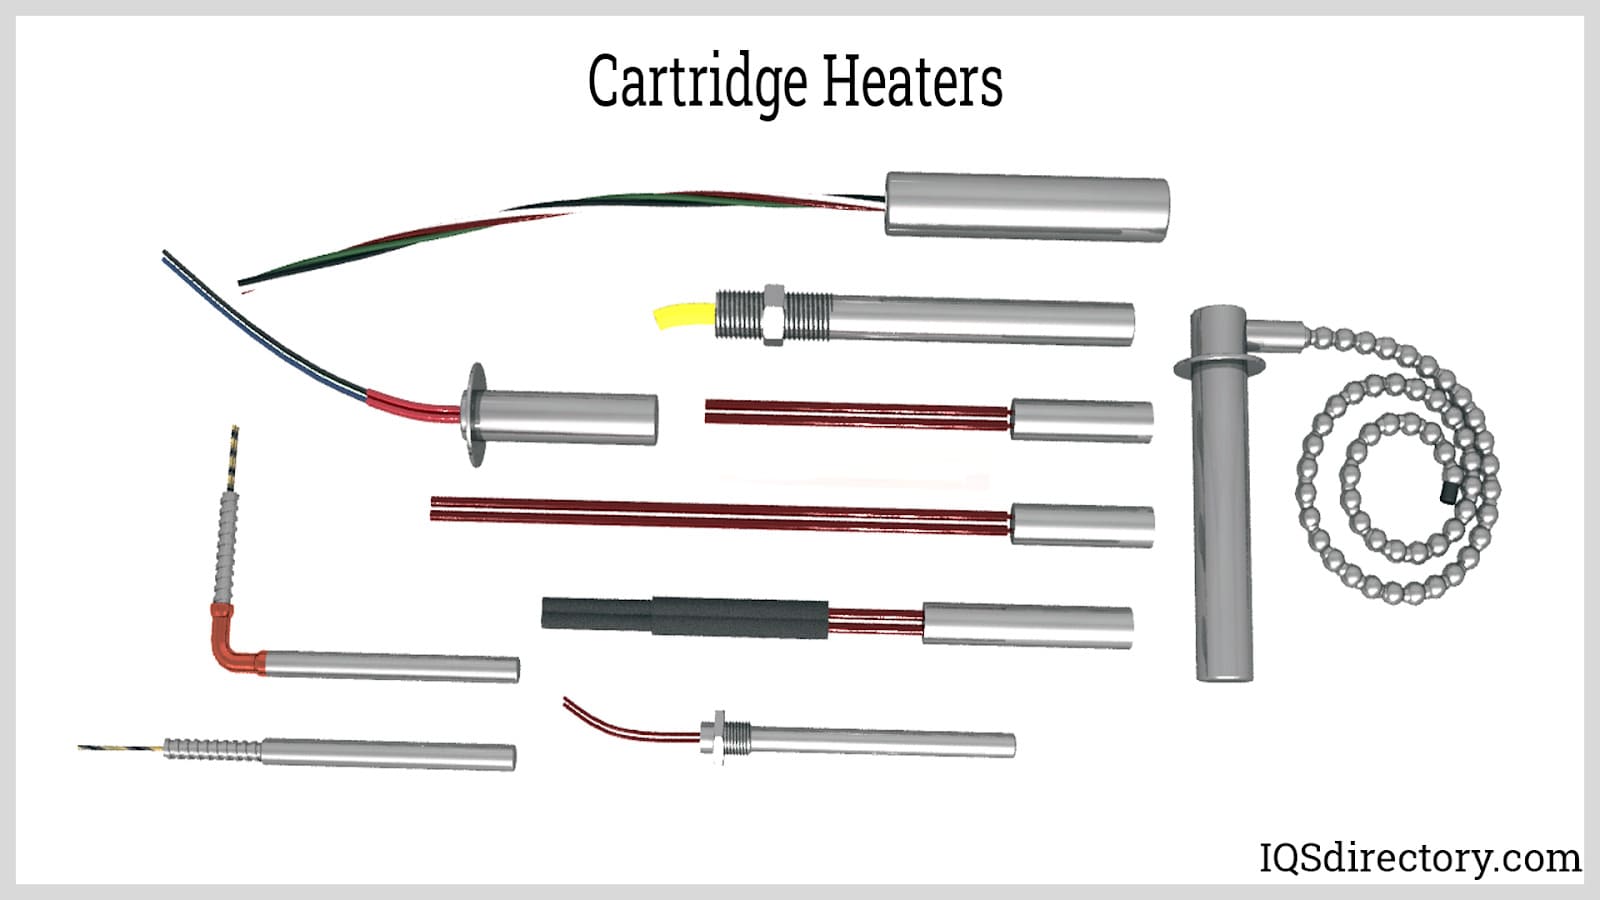 Cartridge Heater: What Is It? How Is It Used? Types Of